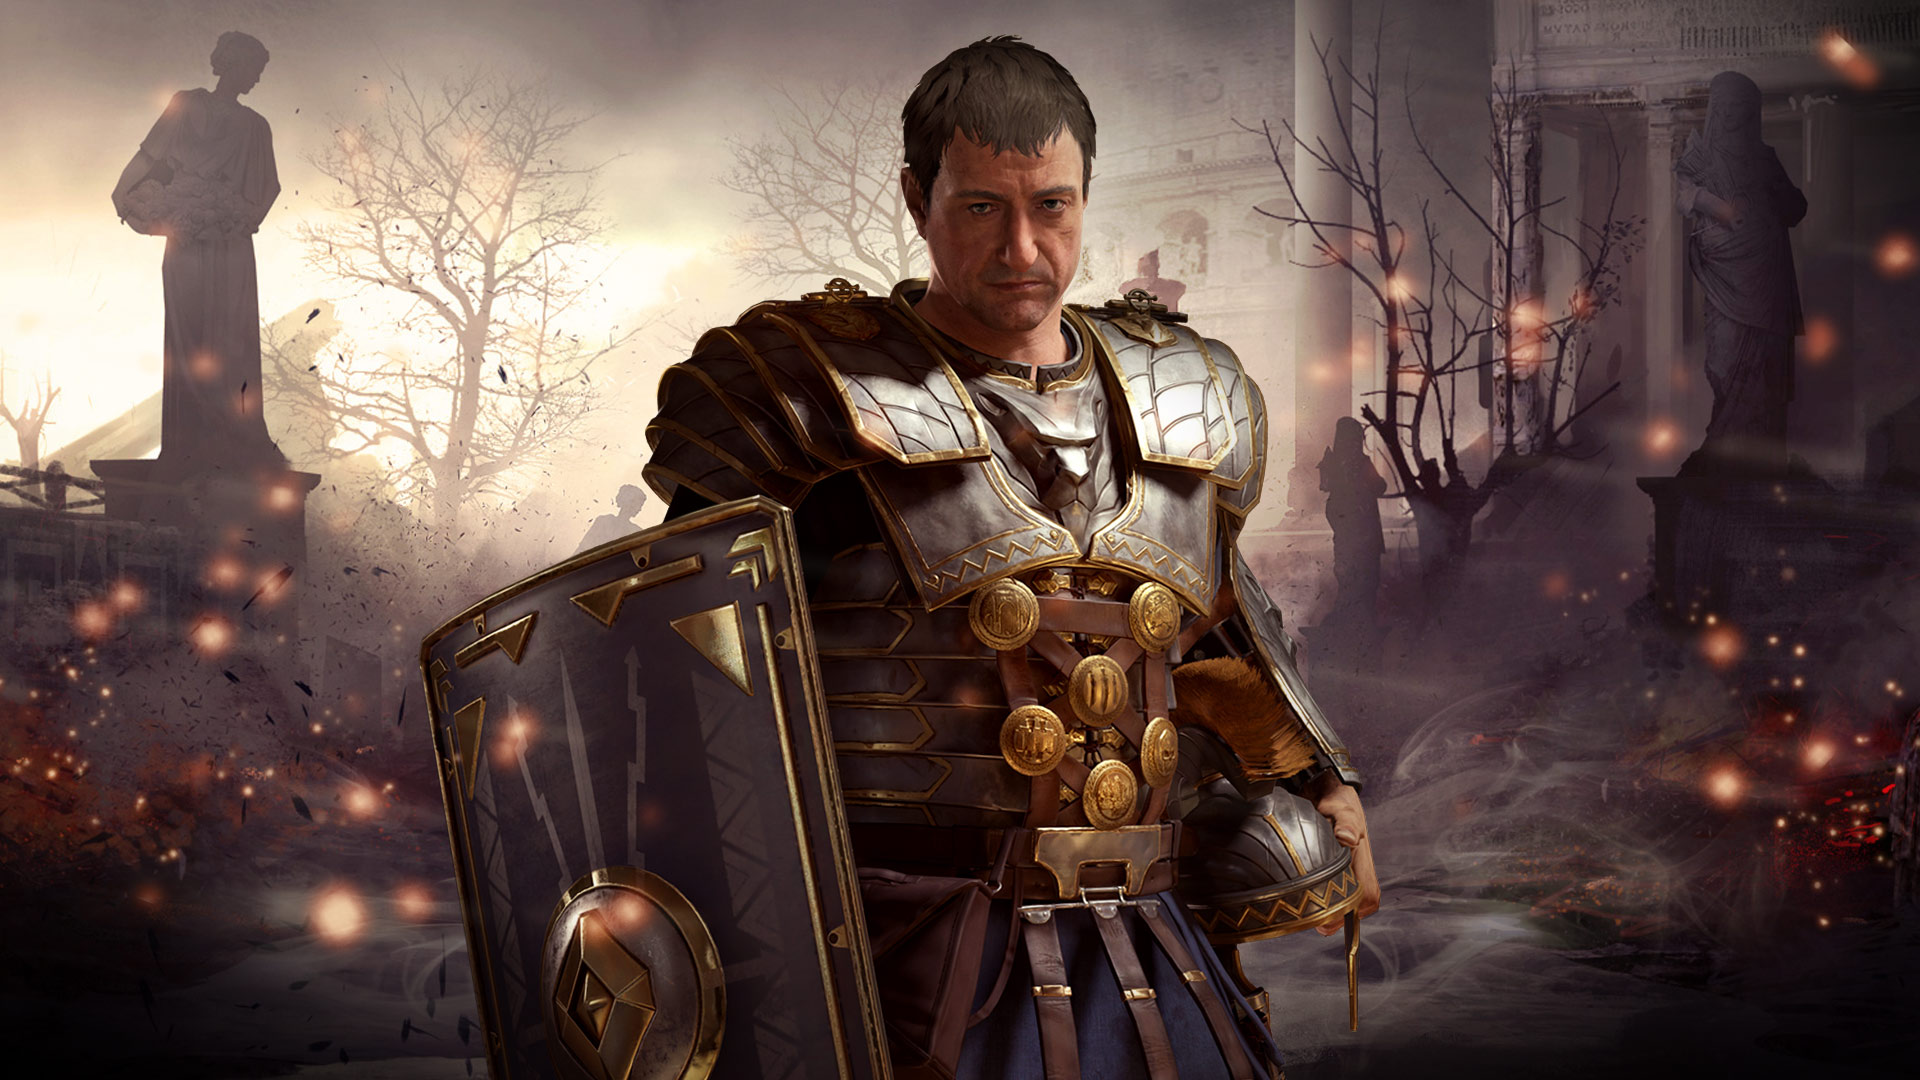 http://vignette2.wikia.nocookie.net/steamtradingcards/images/a/ac/Ryse_Son_of_Rome_Artwork_11.jpg